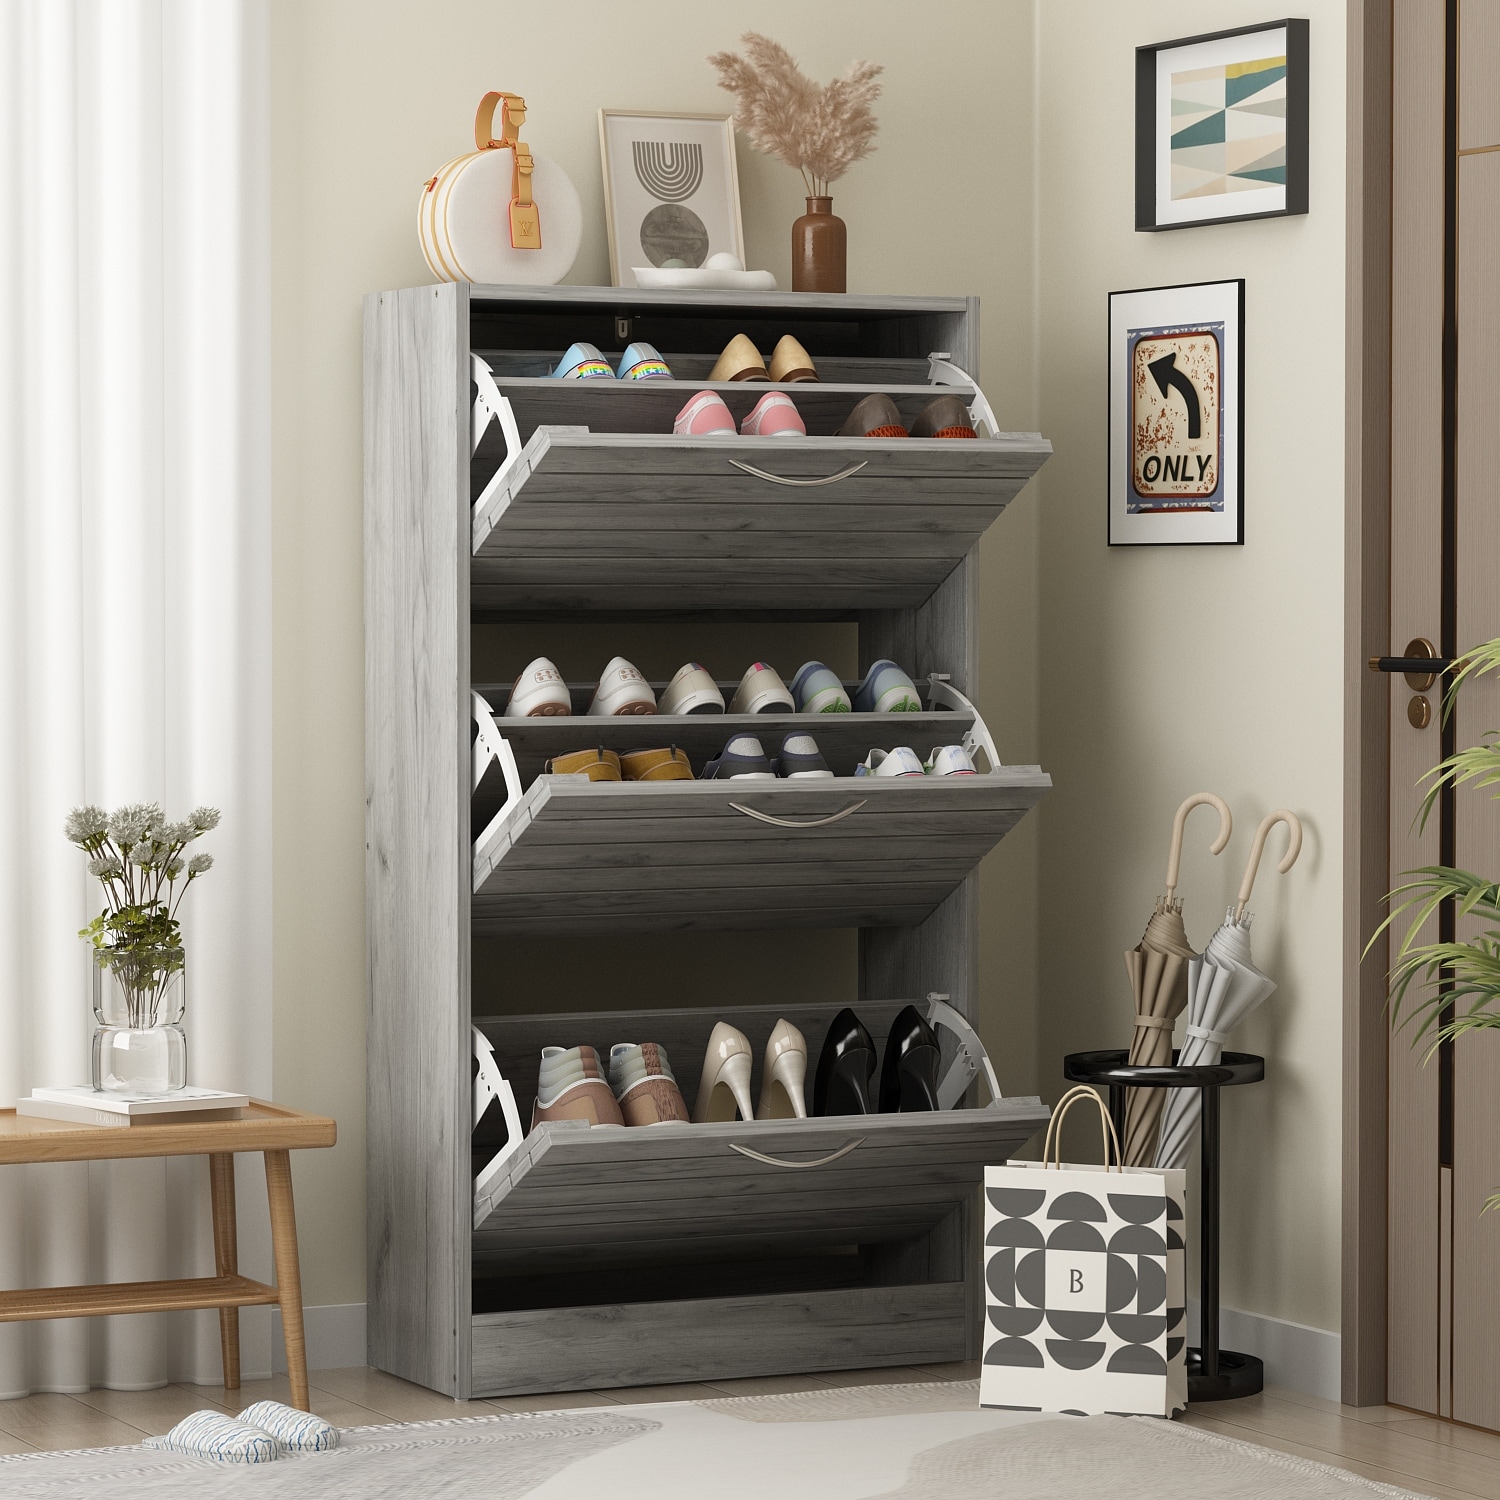 https://ak1.ostkcdn.com/images/products/is/images/direct/2ad51a14676db2518f52d7037c4013ebe3658aae/Shoe-Storage-Cabinet-Modern-Shoe-Storage-Cabinet-for-Entryway-Hallway.jpg